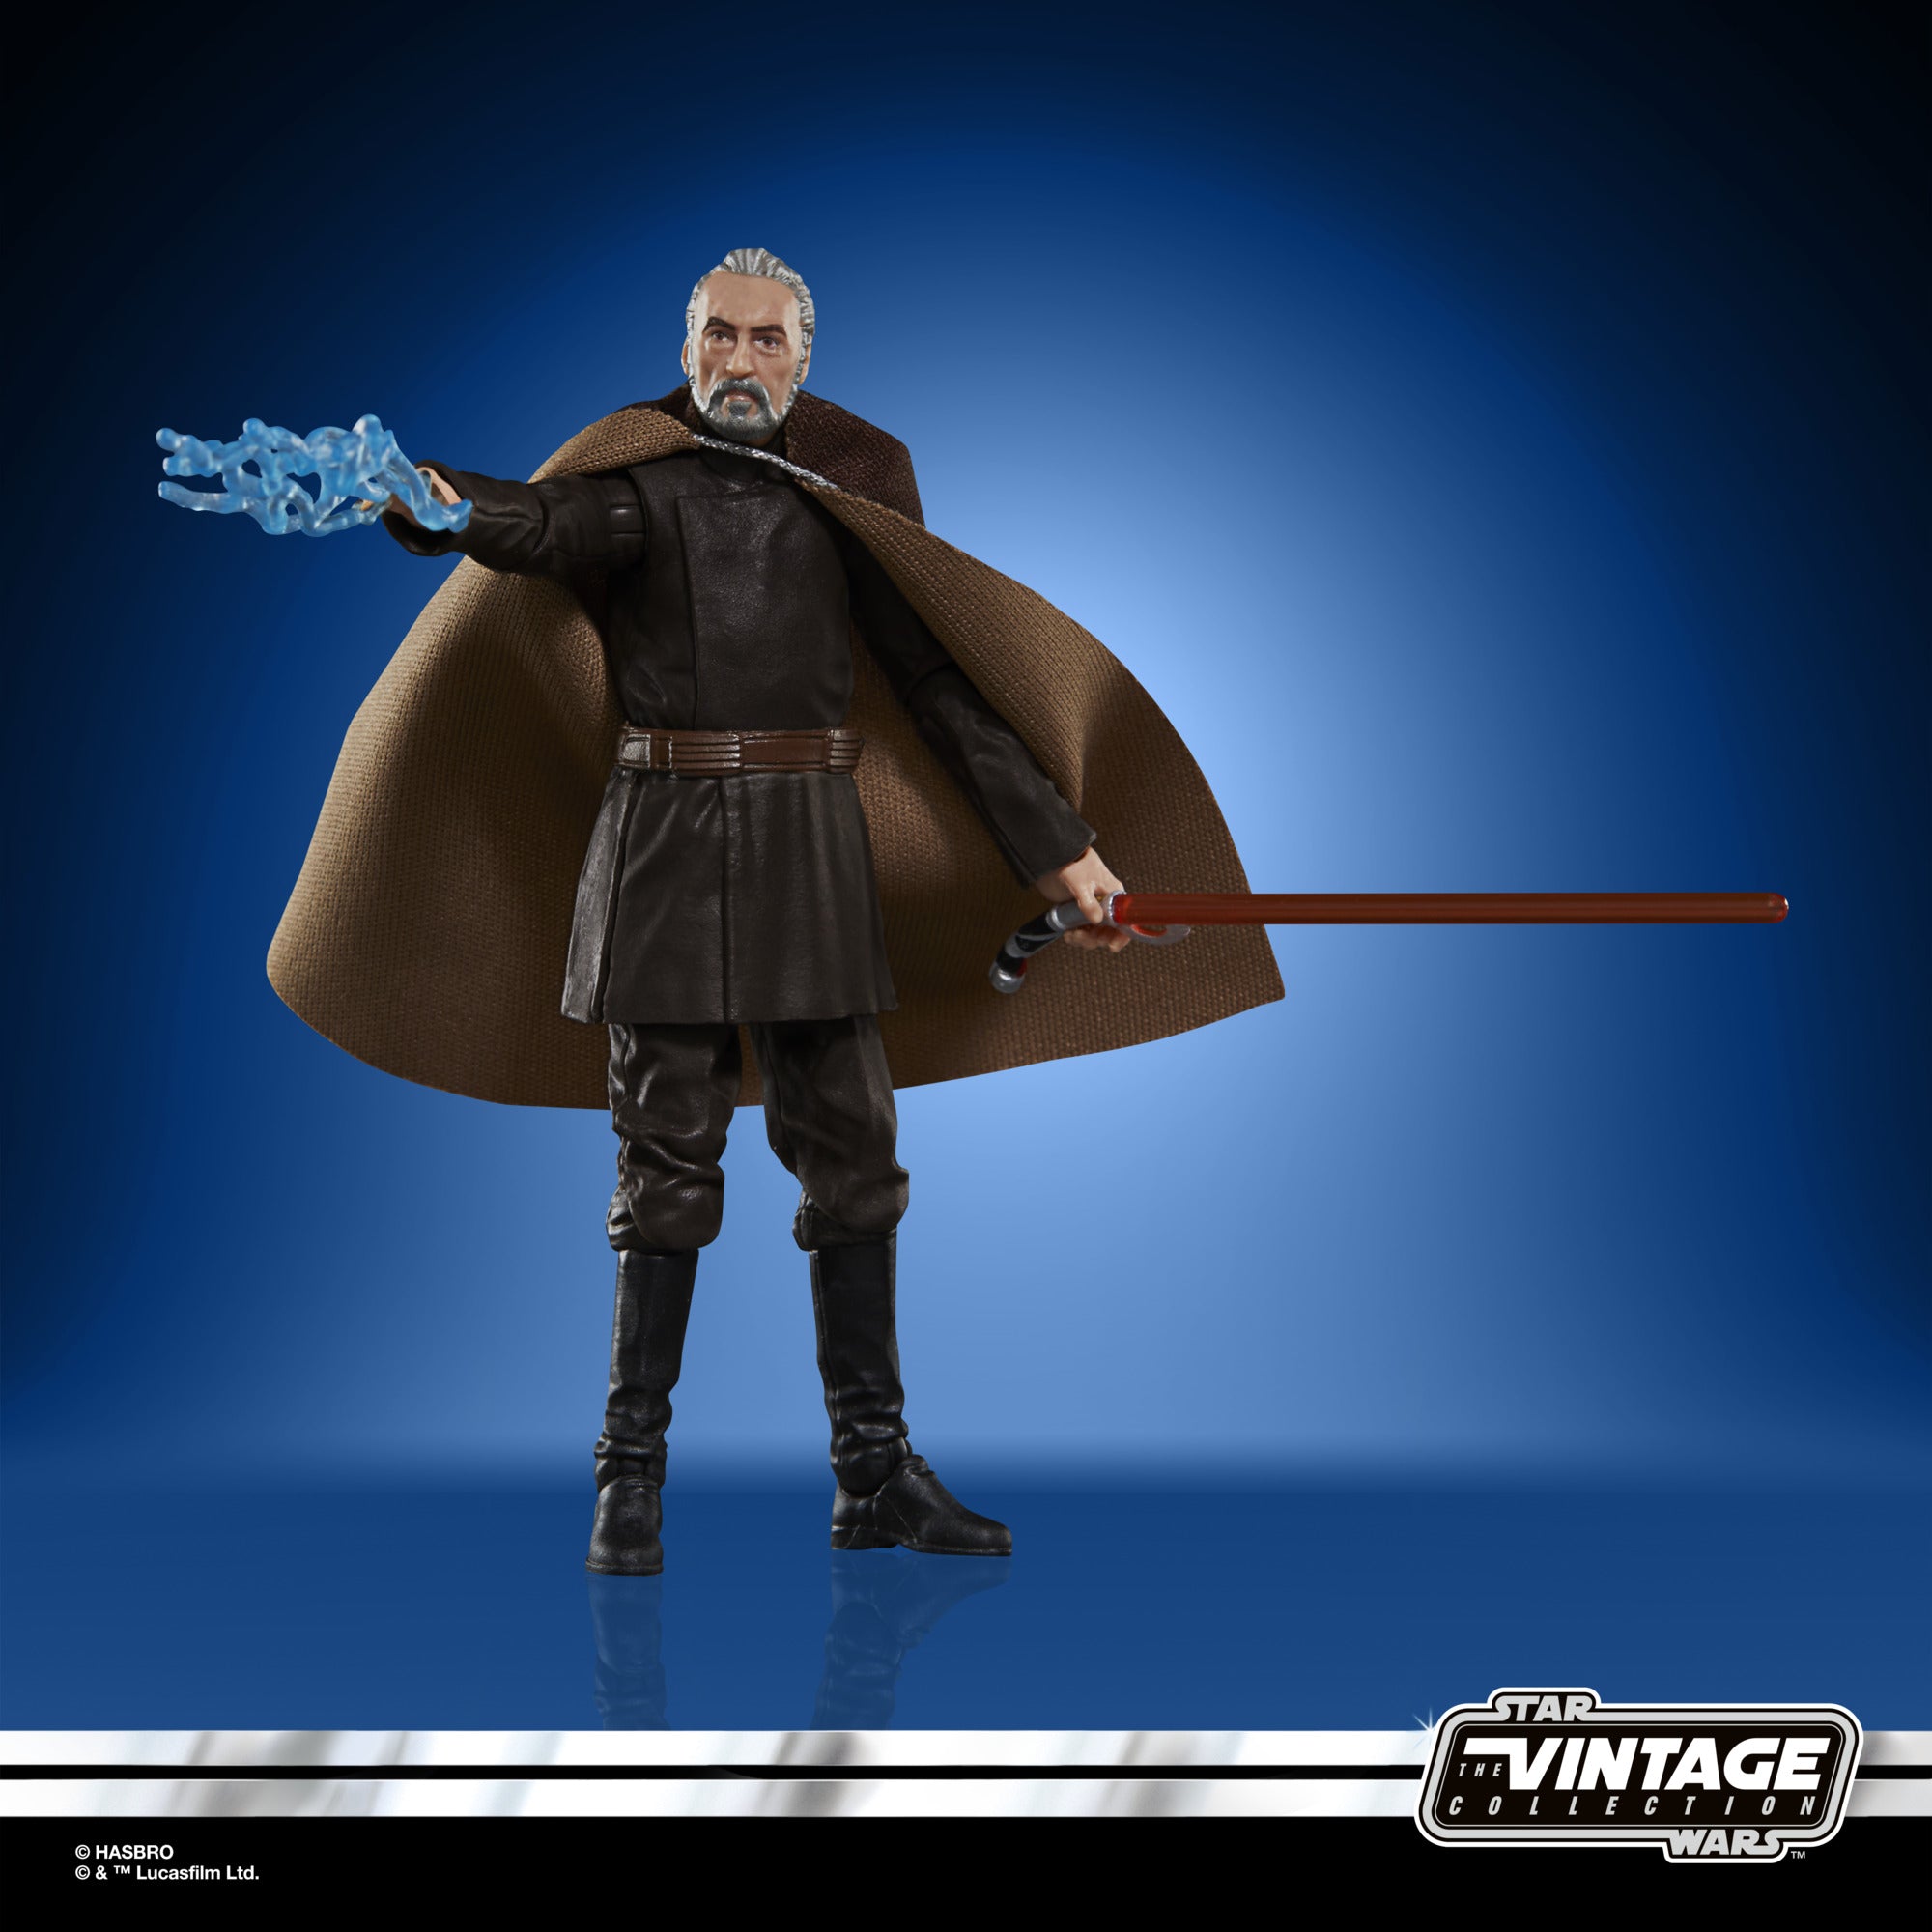 Star Wars The Vintage Collection: Attack Of The Clones - Conde Doku